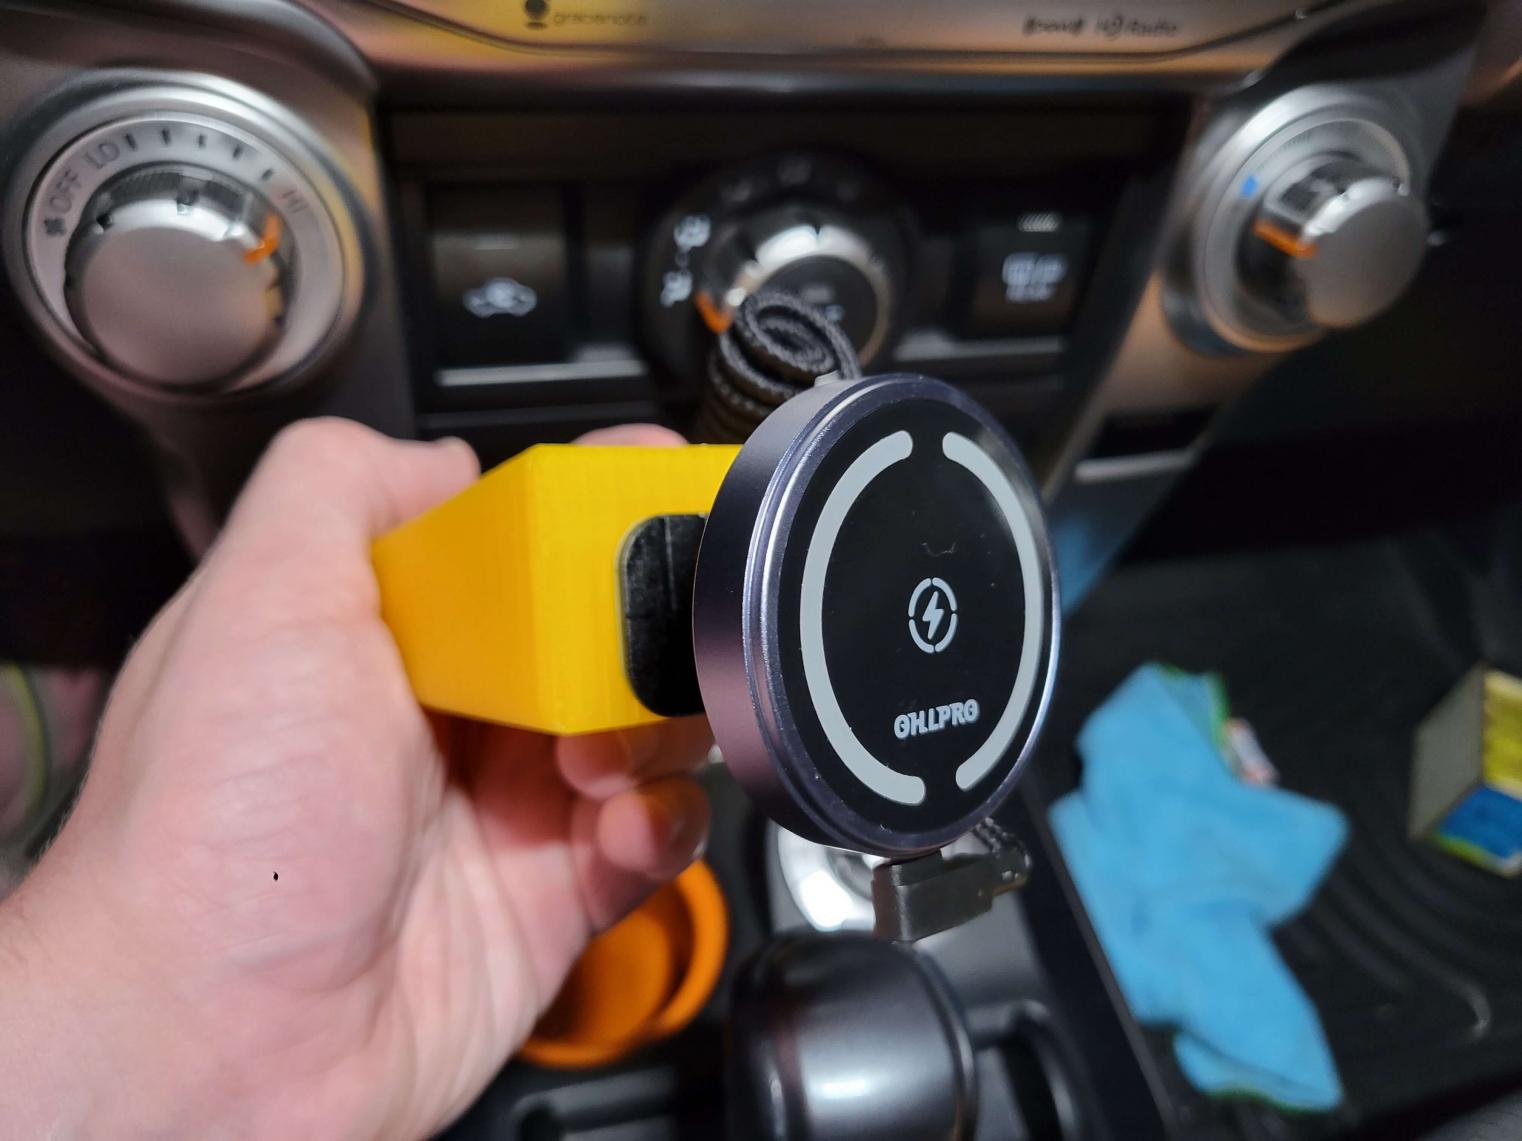 Pics: 3D Printed Cubby Filler for Magnetic Cell Phone Mount-20230905_211307-jpg